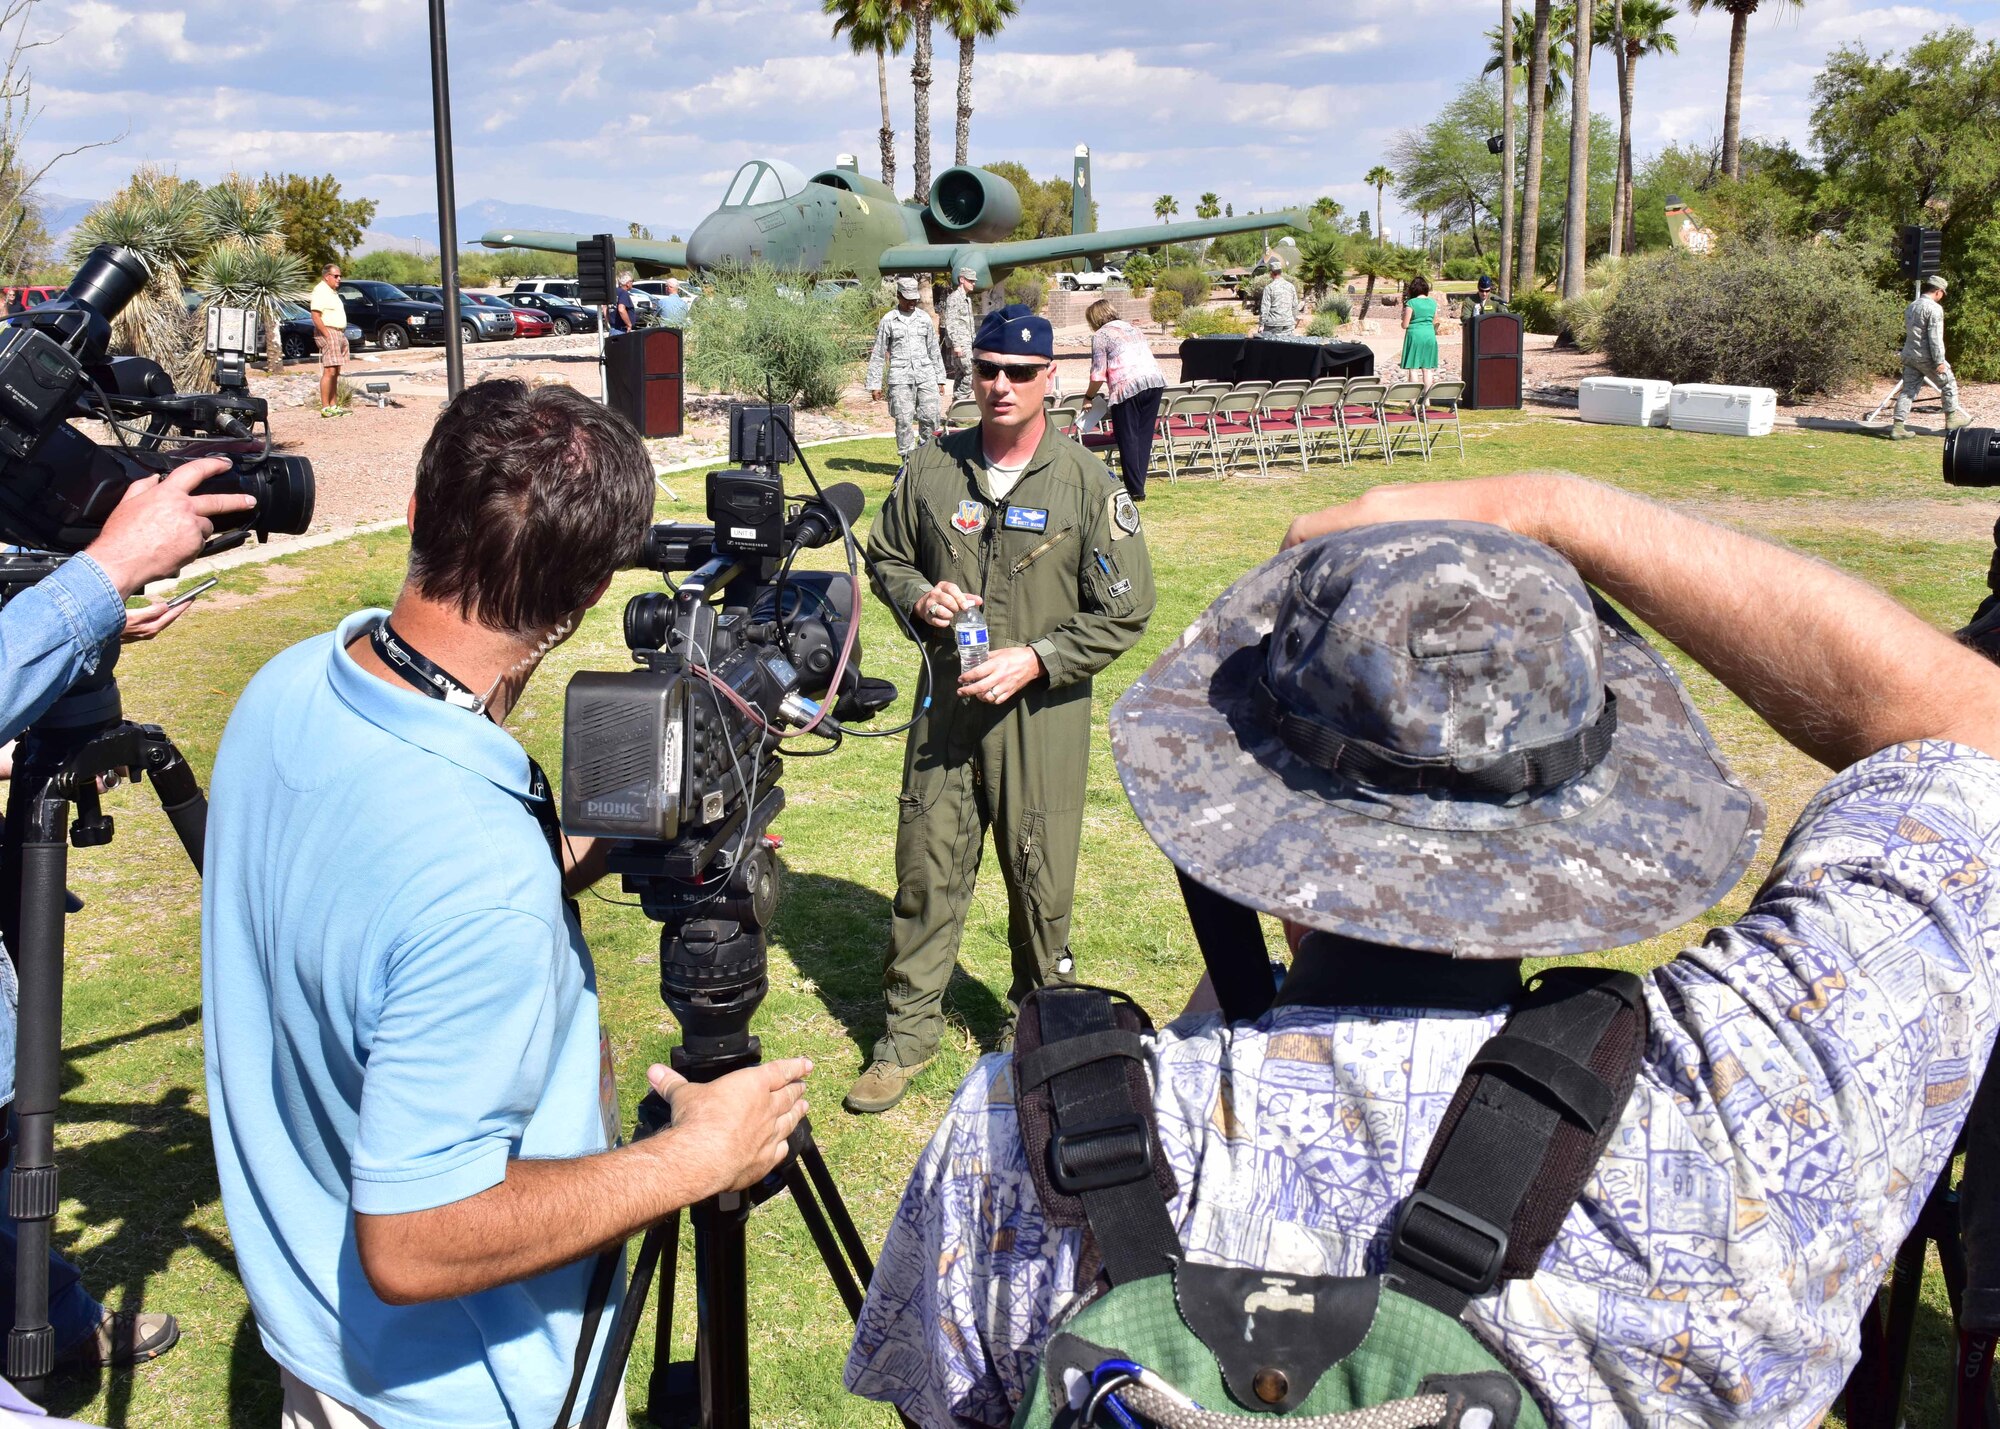 Lt. Col. Brett Waring, 47 Fighter Squadron Hawgsmoke project lead, answers questions for the media June 1 before the Fallen Hawg remembrance ceremony at Davis Monthan Air Force Base, Ariz. (U.S. Air Force photo by Tech. Sgt. Louis Vega Jr.)